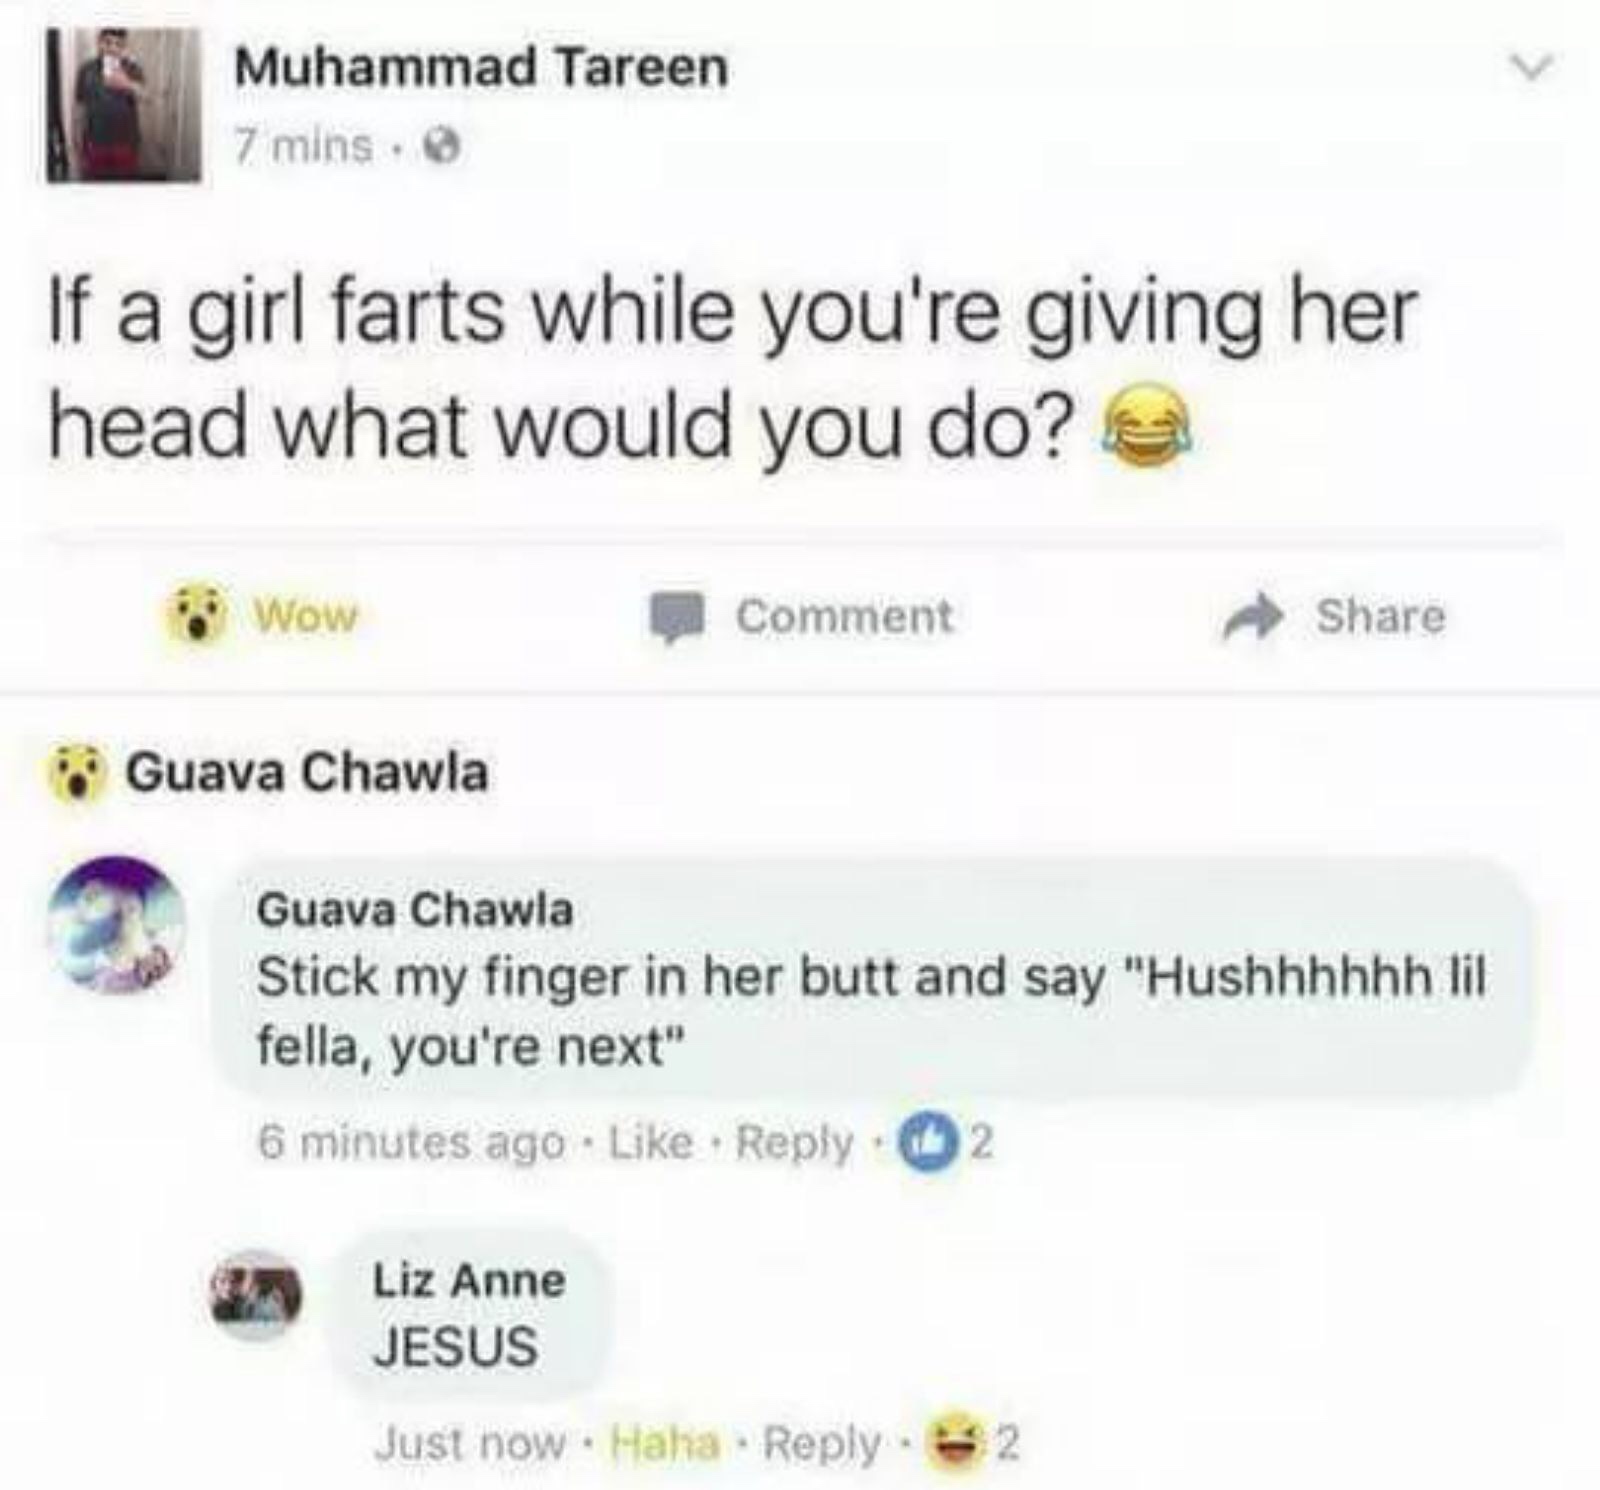 if a girl farts meme - Muhammad Tareen 7 mins. If a girl farts while you're giving her head what would you do? Wow Comment Guava Chawla Guava Chawla Stick my finger in her butt and say "Hushhhhhh lil fella, you're next" 6 minutes ago 2 Liz Anne Jesus Just